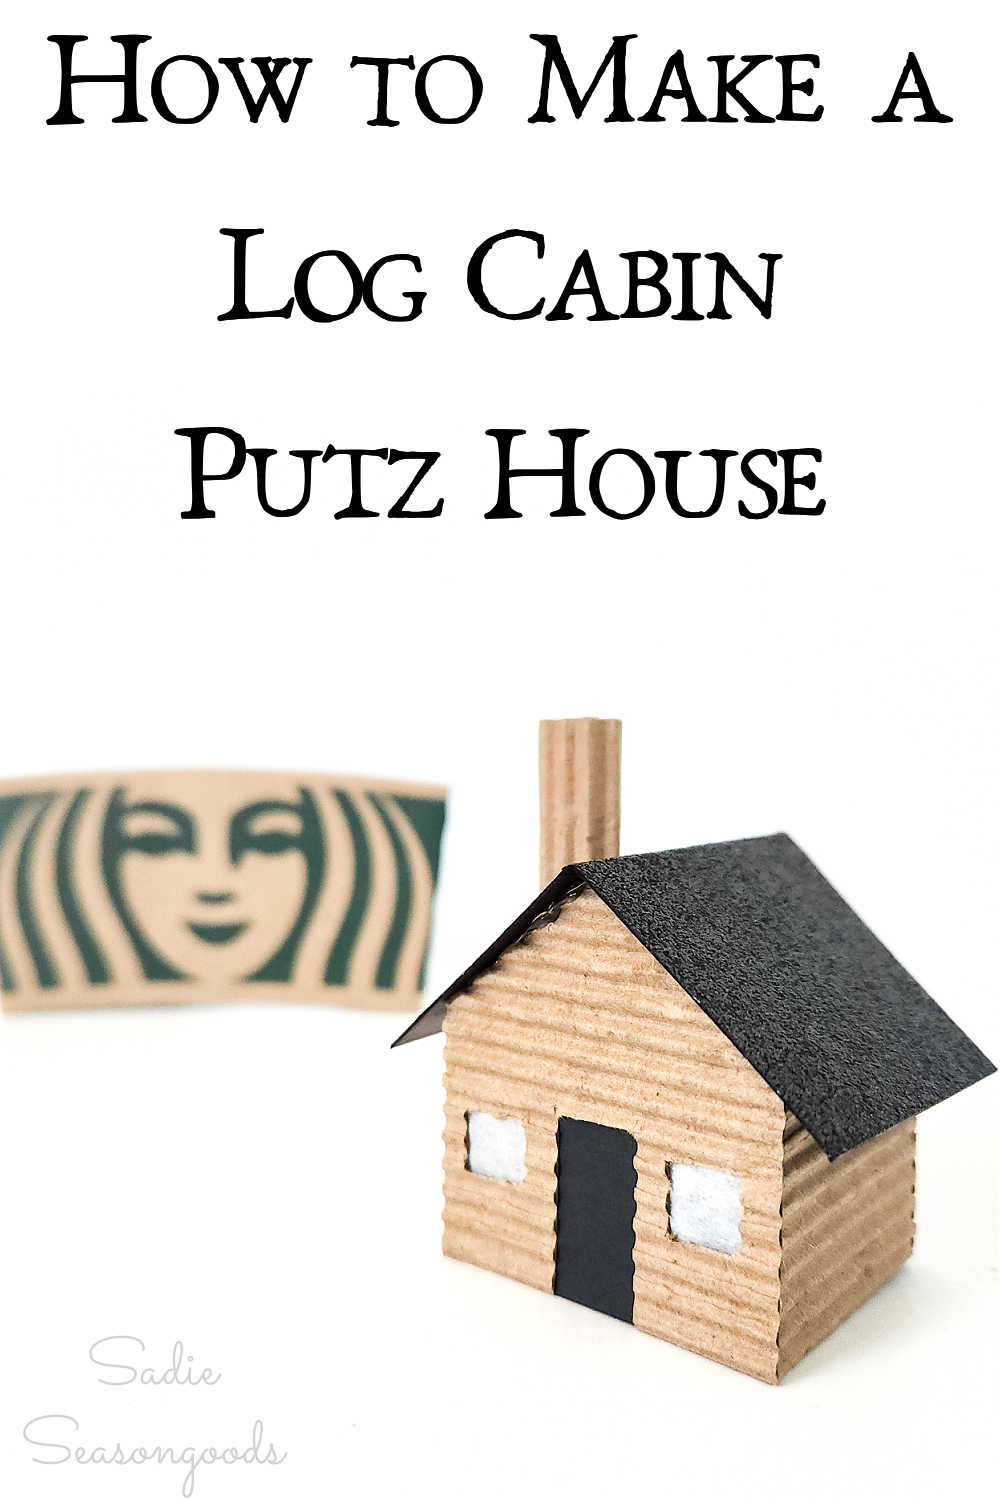 cabin putz house from a cardboard coffee cup sleeve